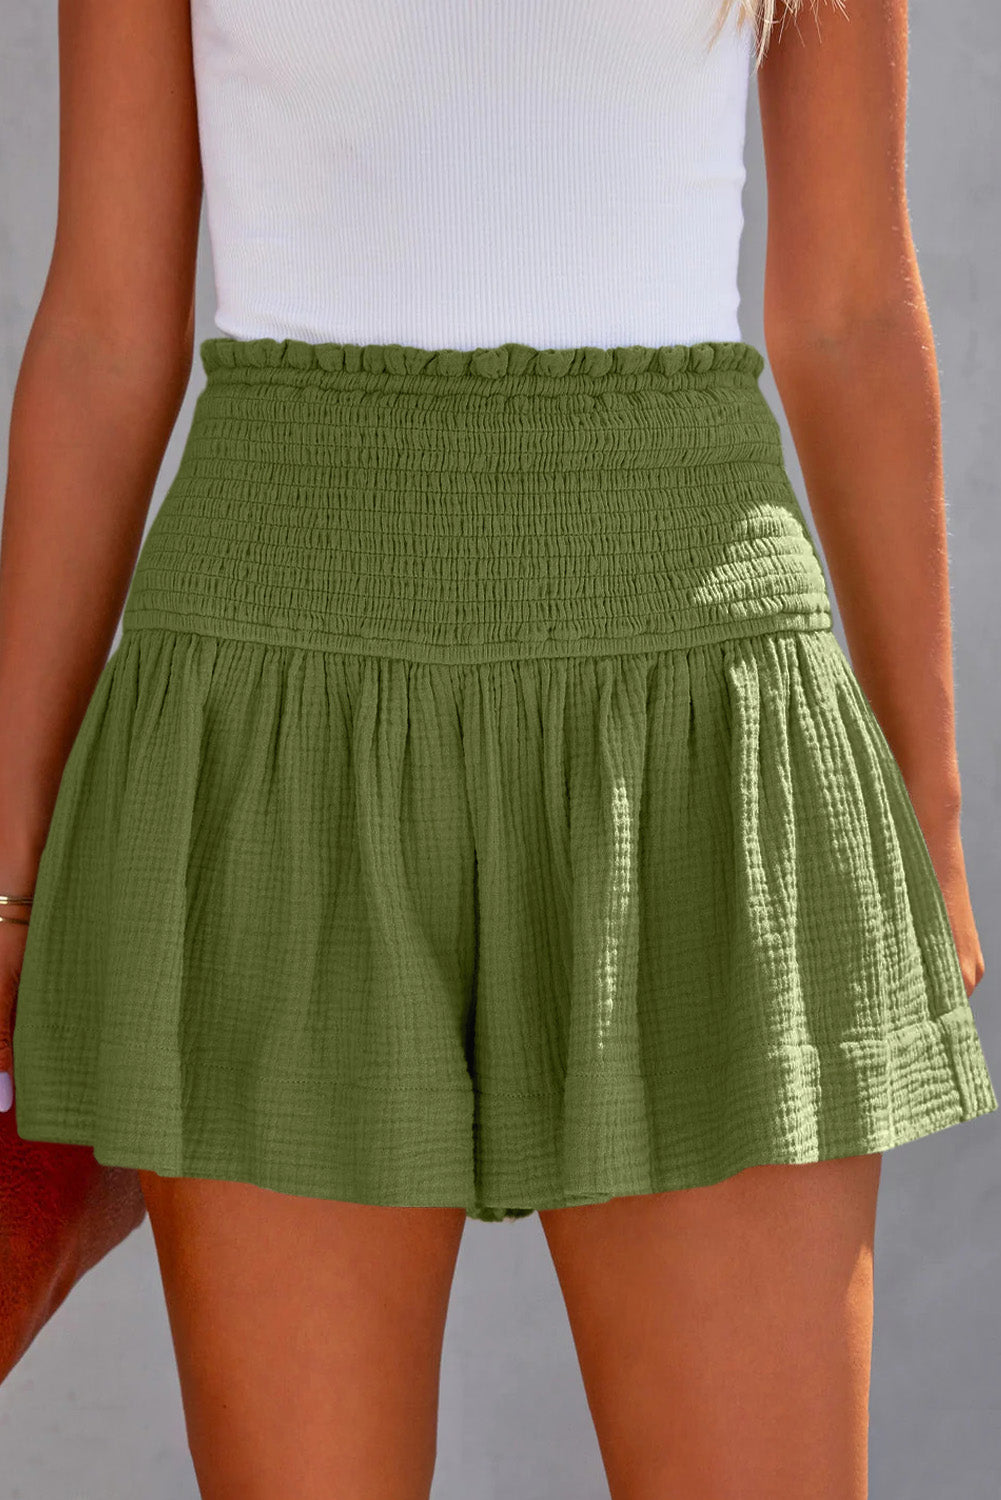 Smocked Waistband Shorts - Green / S - Women’s Clothing & Accessories - Shorts - 7 - 2024